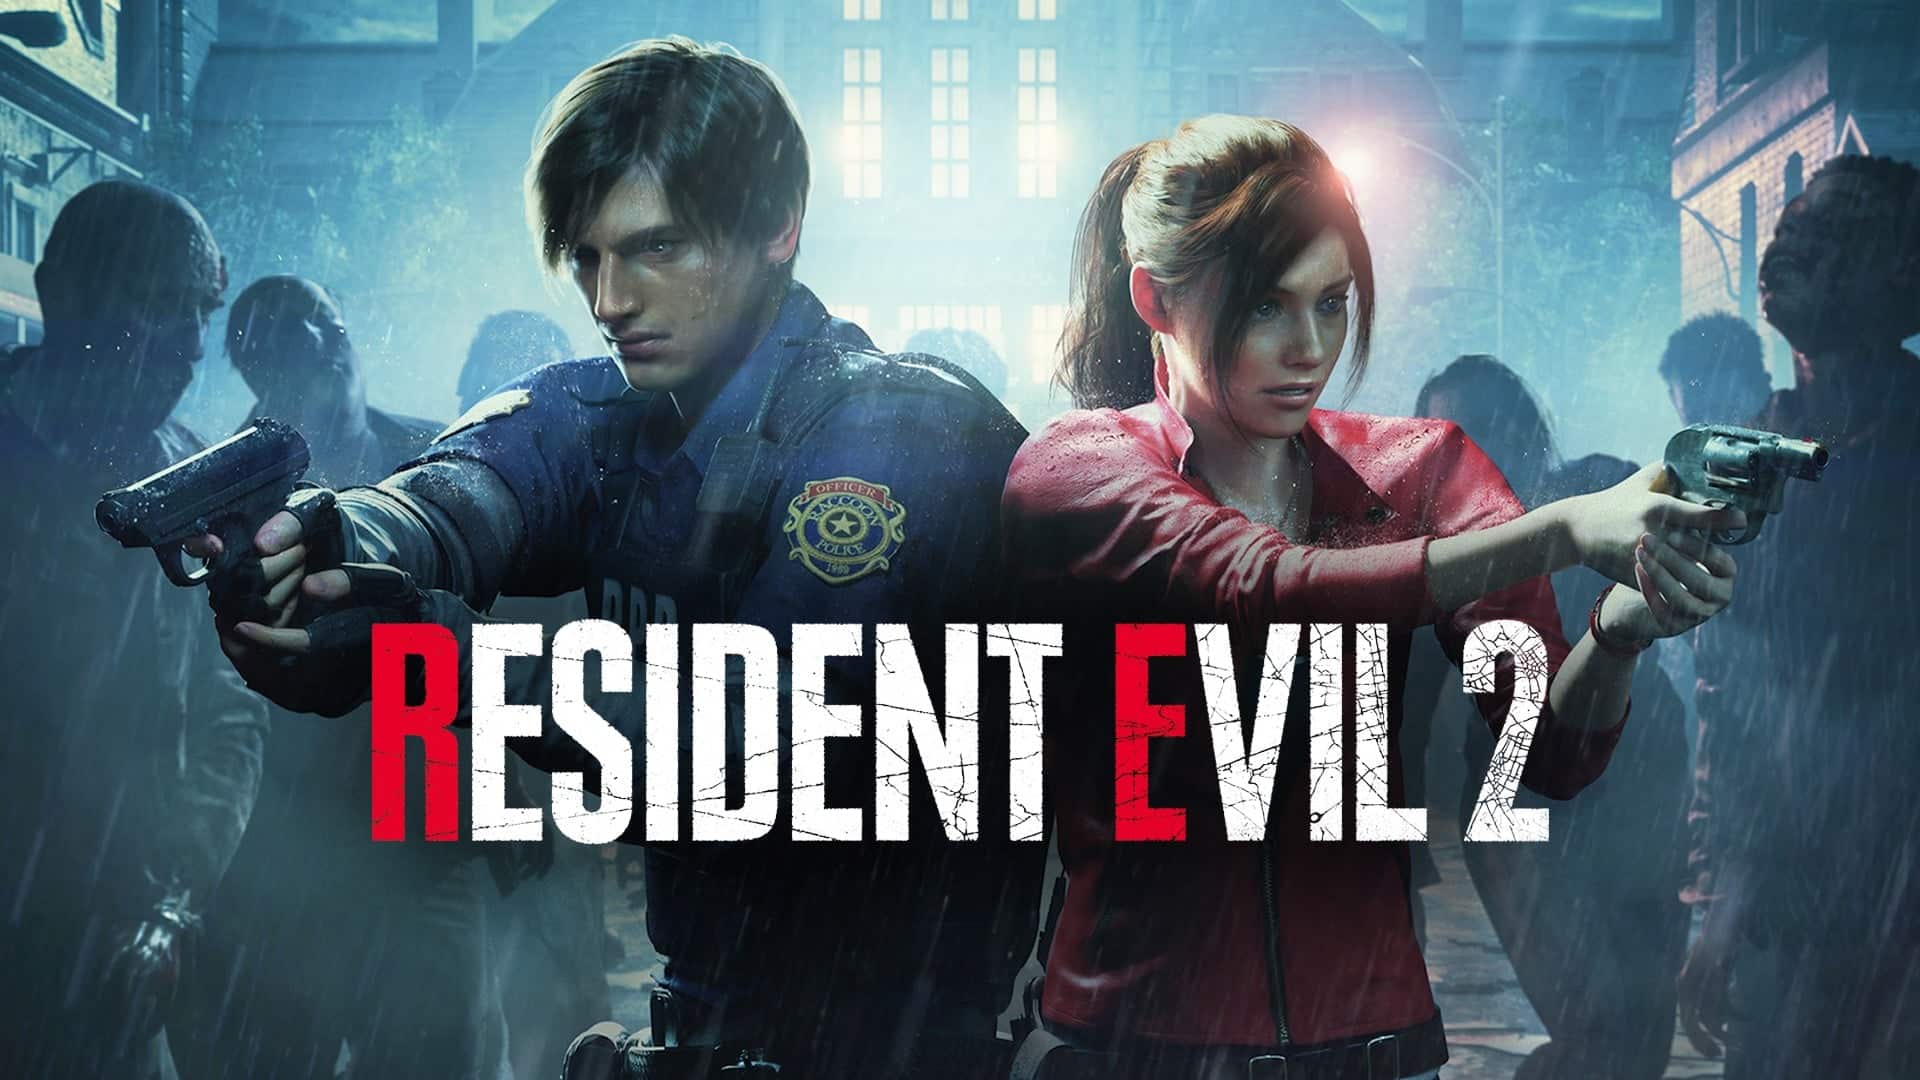 RESIDENT EVIL 2 XBOX - Drunkers Game Store